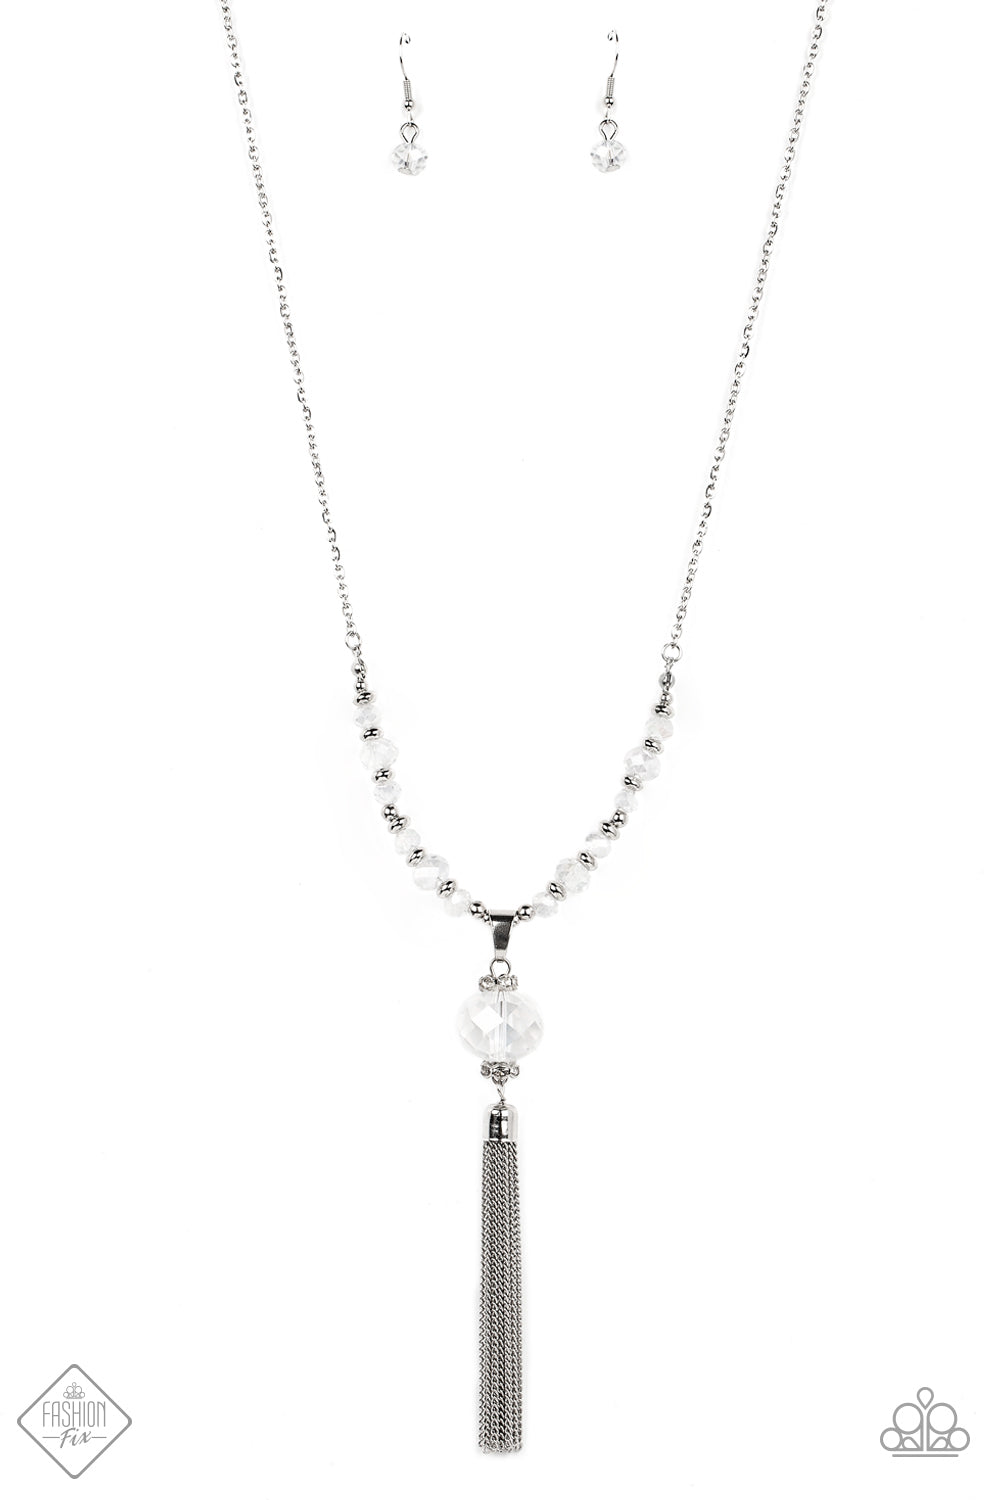 Paparazzi Necklace - One SWAY or Another - White